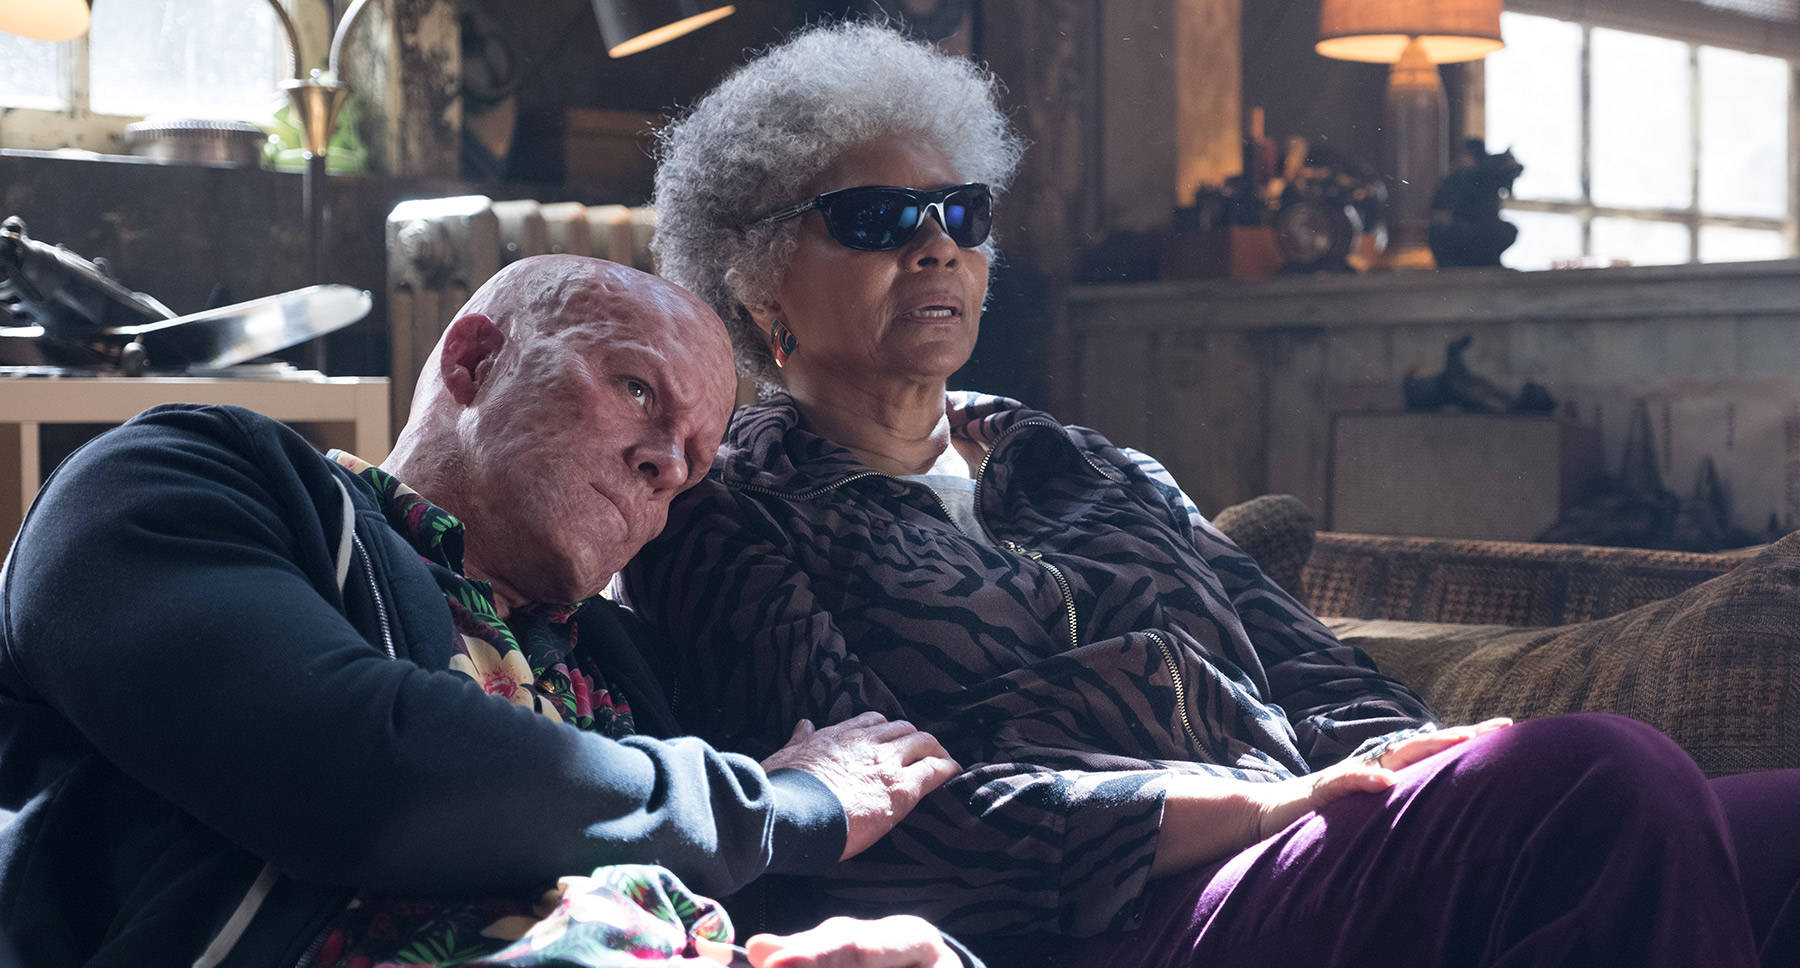 In this film still from “Deadpool 2” released by 20th Century Fox, Wade Wilson (Ryan Reynolds) leans on Blind Al (Leslie Uggams). (Photo courtesy 20th Century Fox)